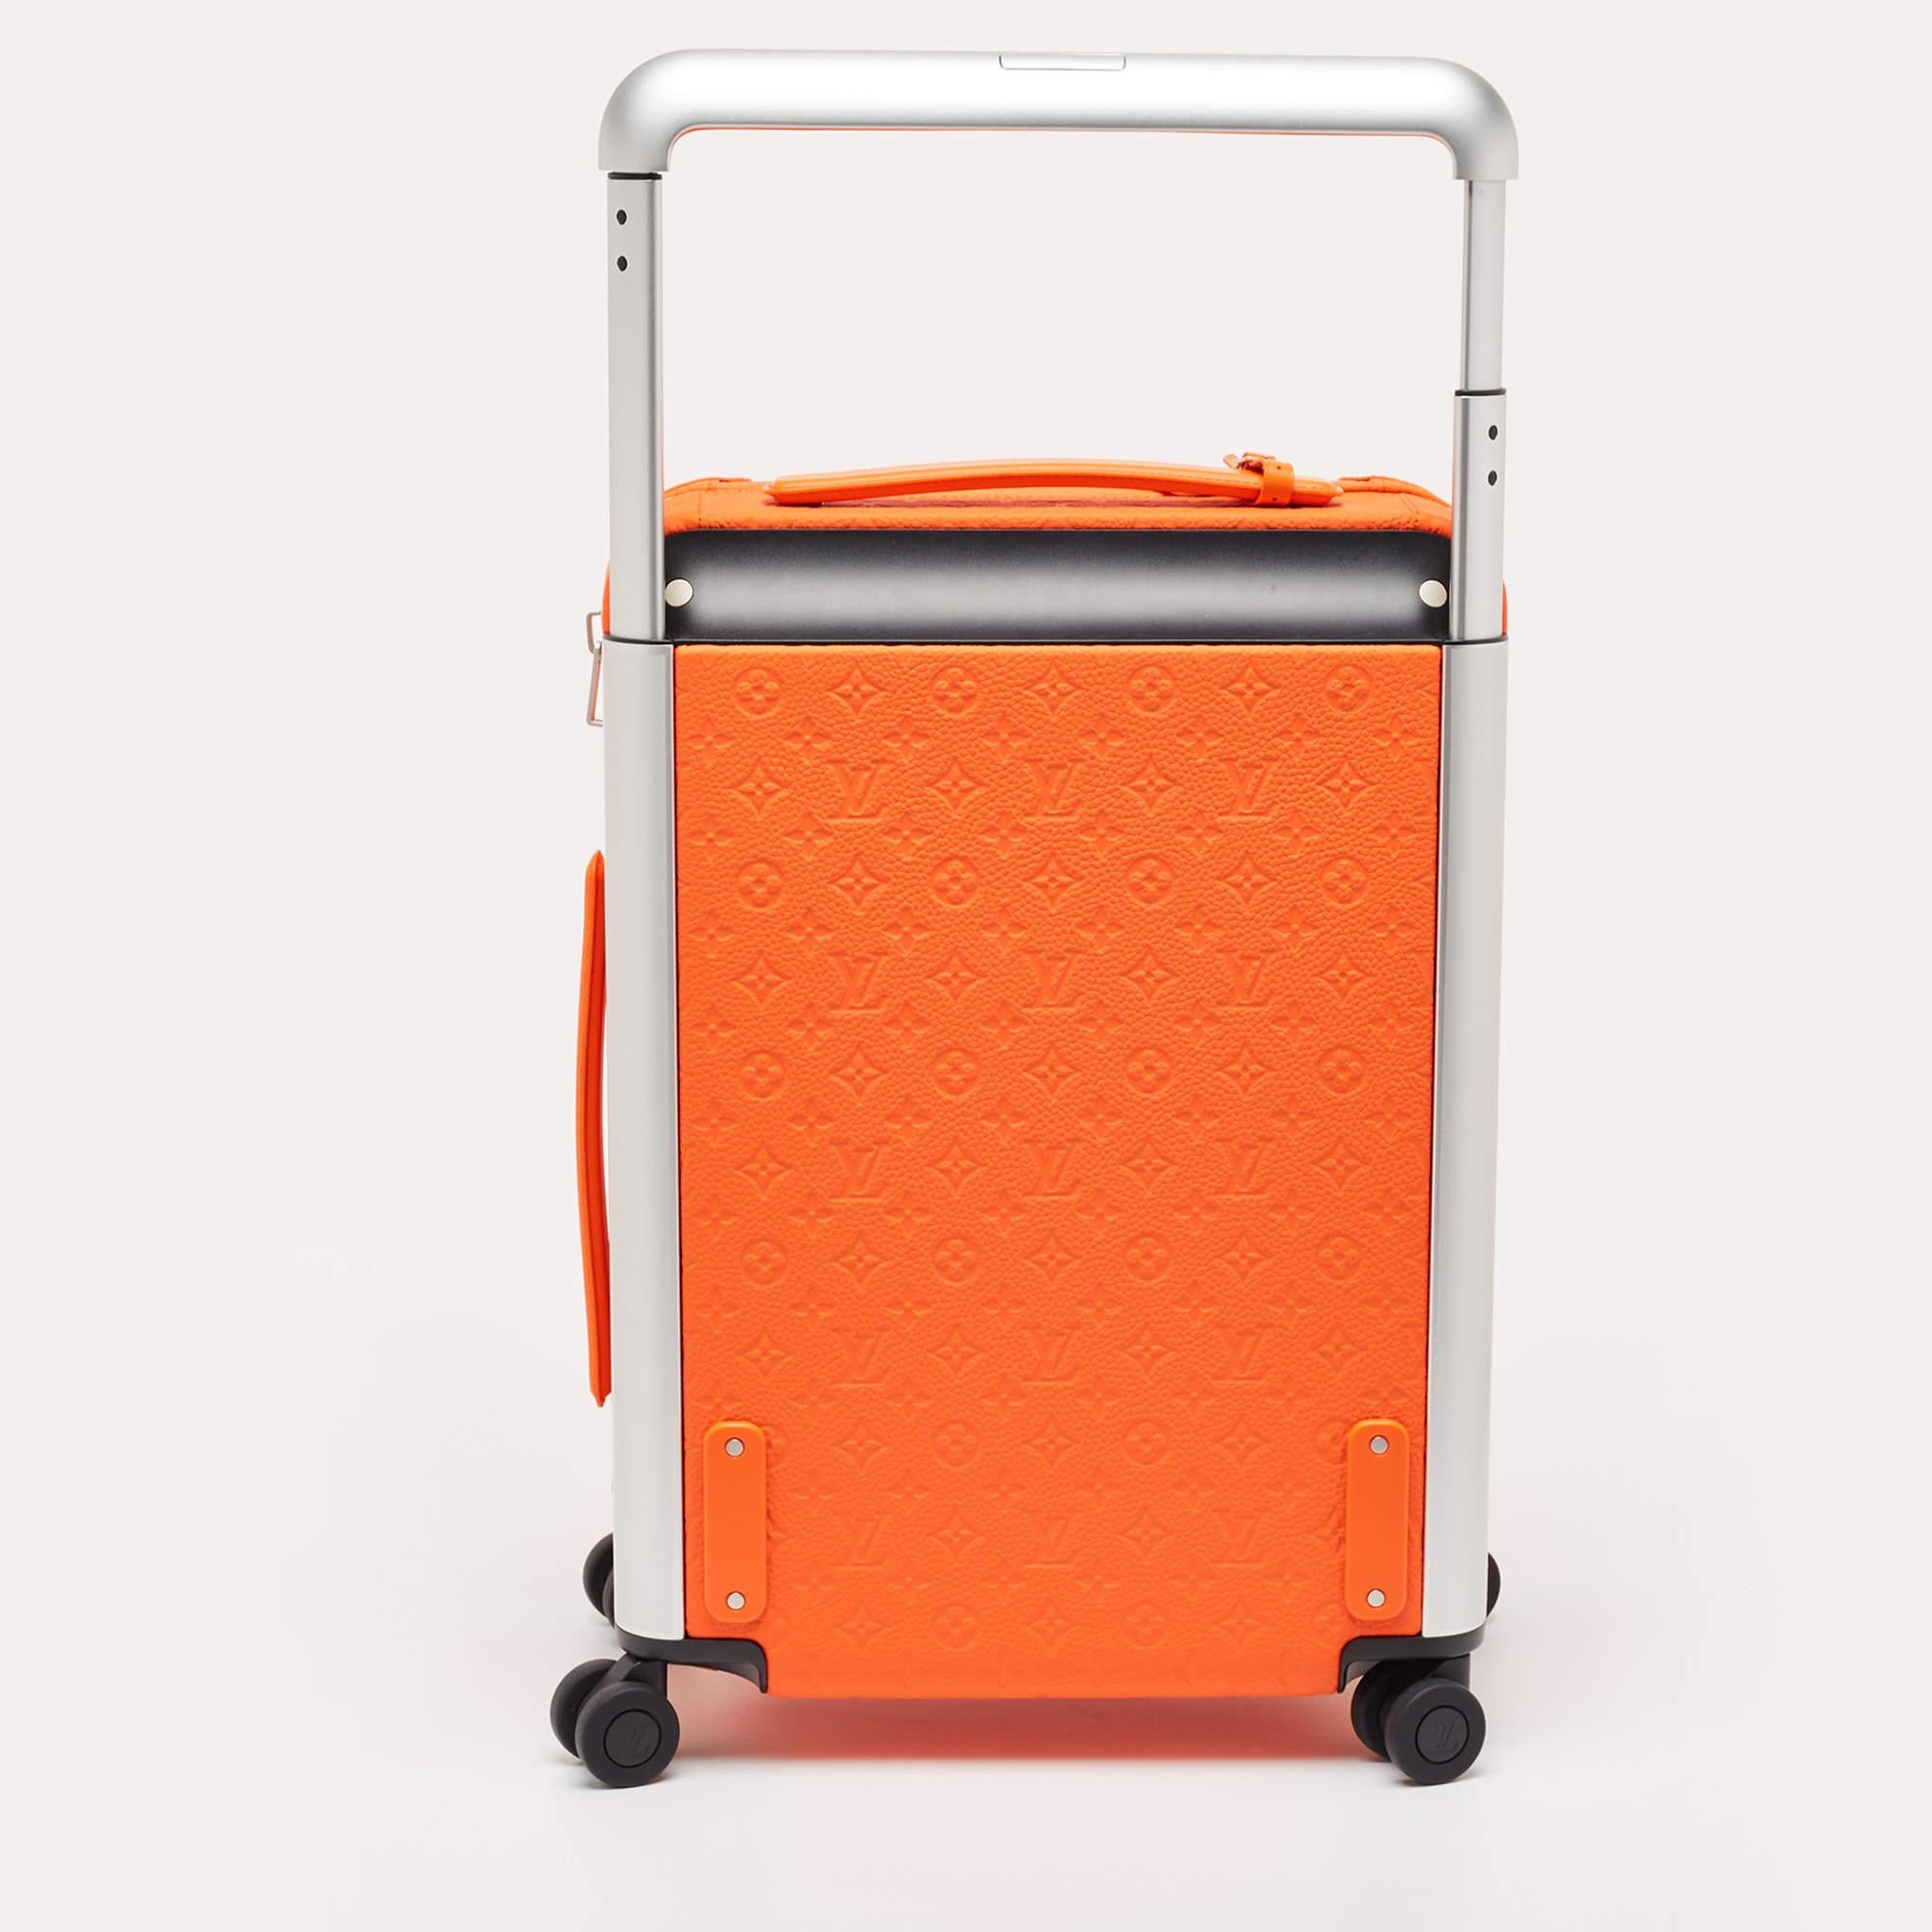 The Louis Vuitton Horizon 55 Suitcase is a luxurious travel accessory. Crafted from premium orange Empreinte leather, it features LV's iconic monogram pattern, a spacious interior, smooth wheels, and a telescopic handle, ensuring both style and